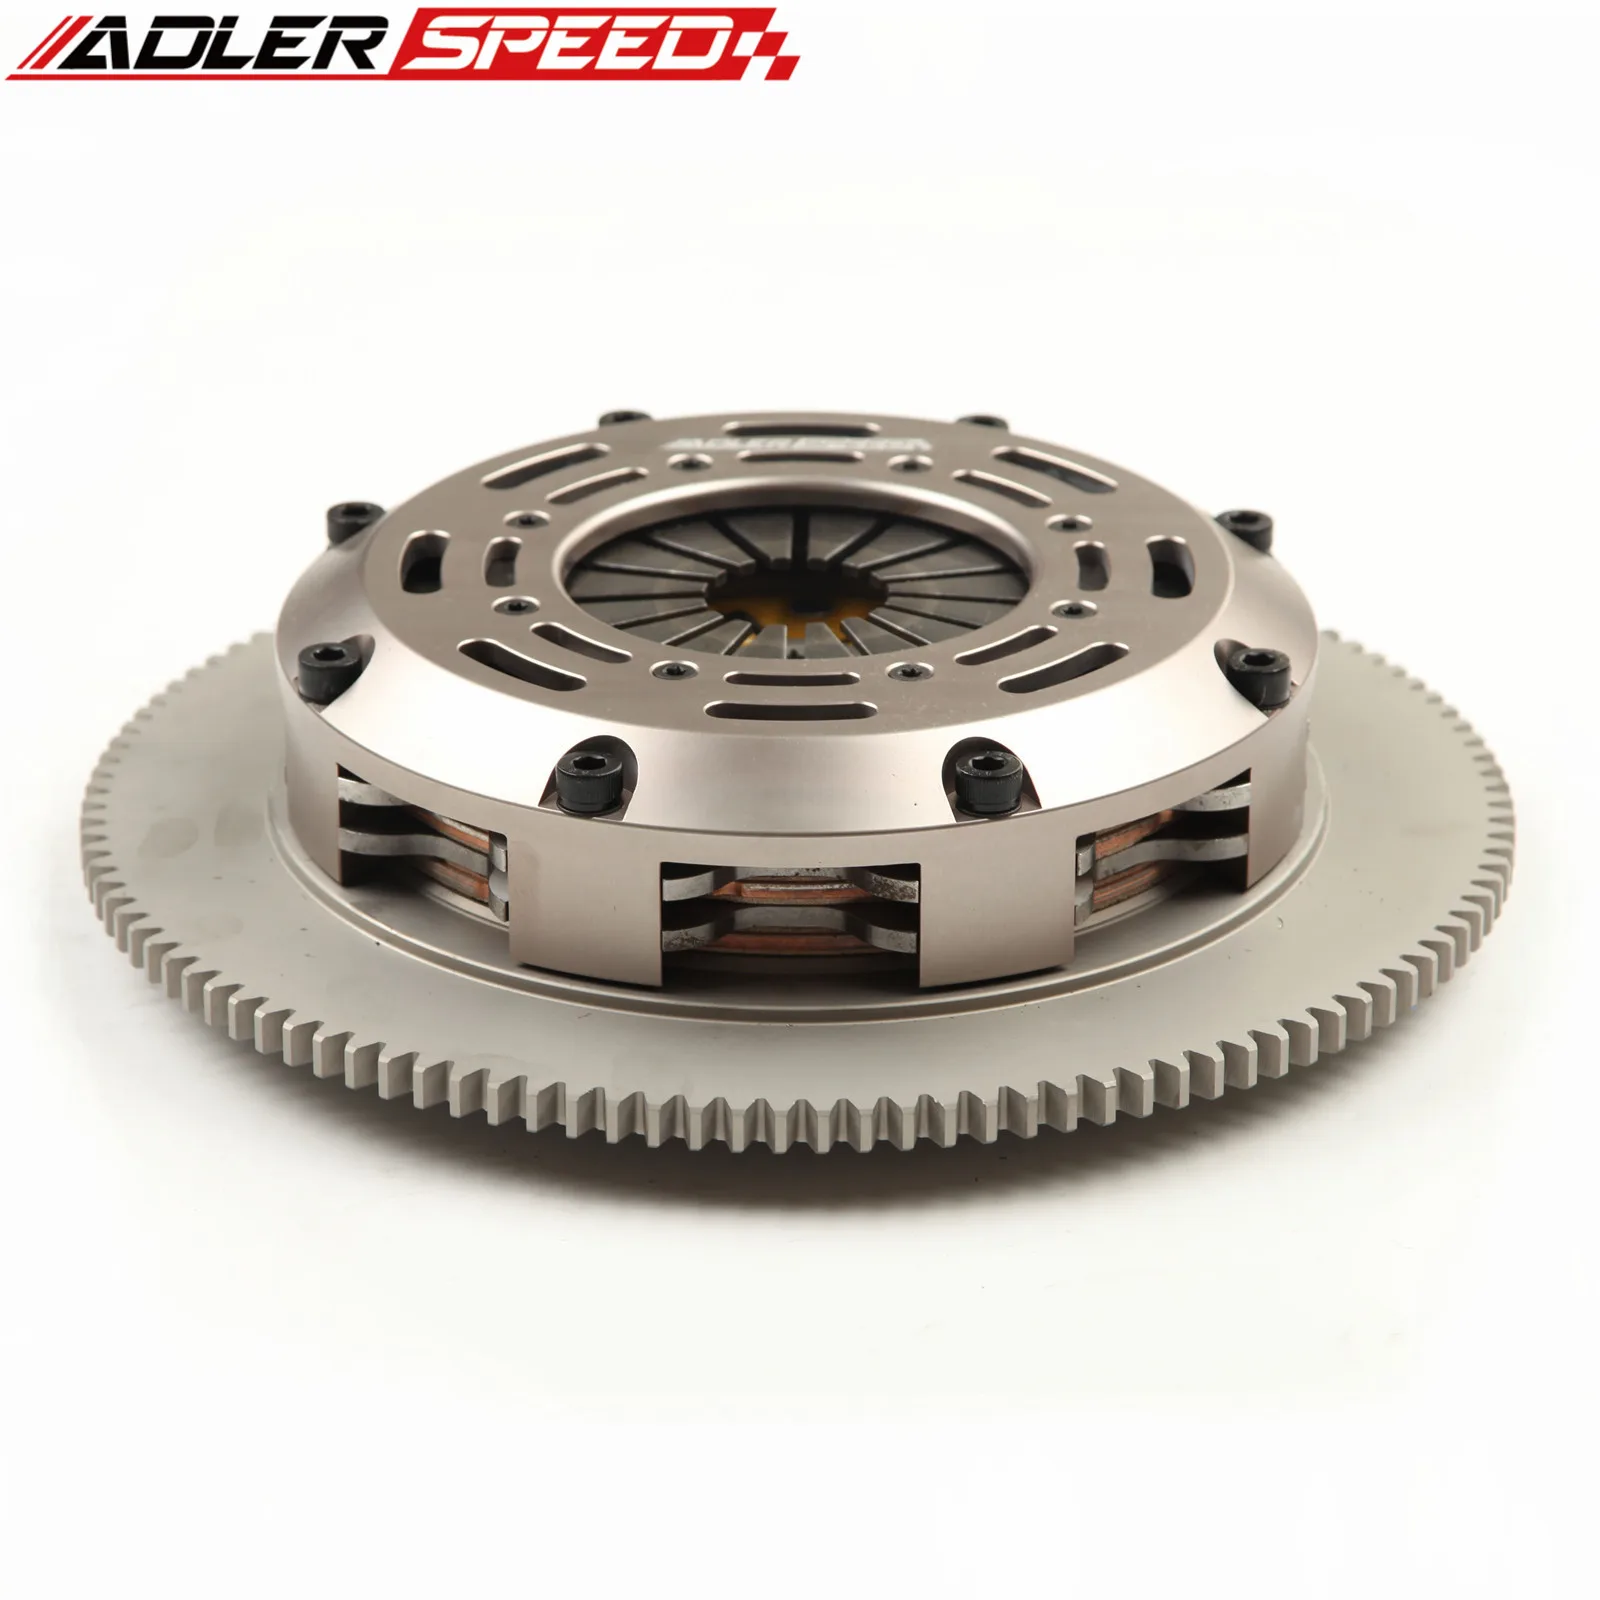 

ADLERSPEED SPRUNG CLUTCH TWIN DISC KIT FOR 77-88 TOYOTA 4RUNNER CELICA ST GT GTS